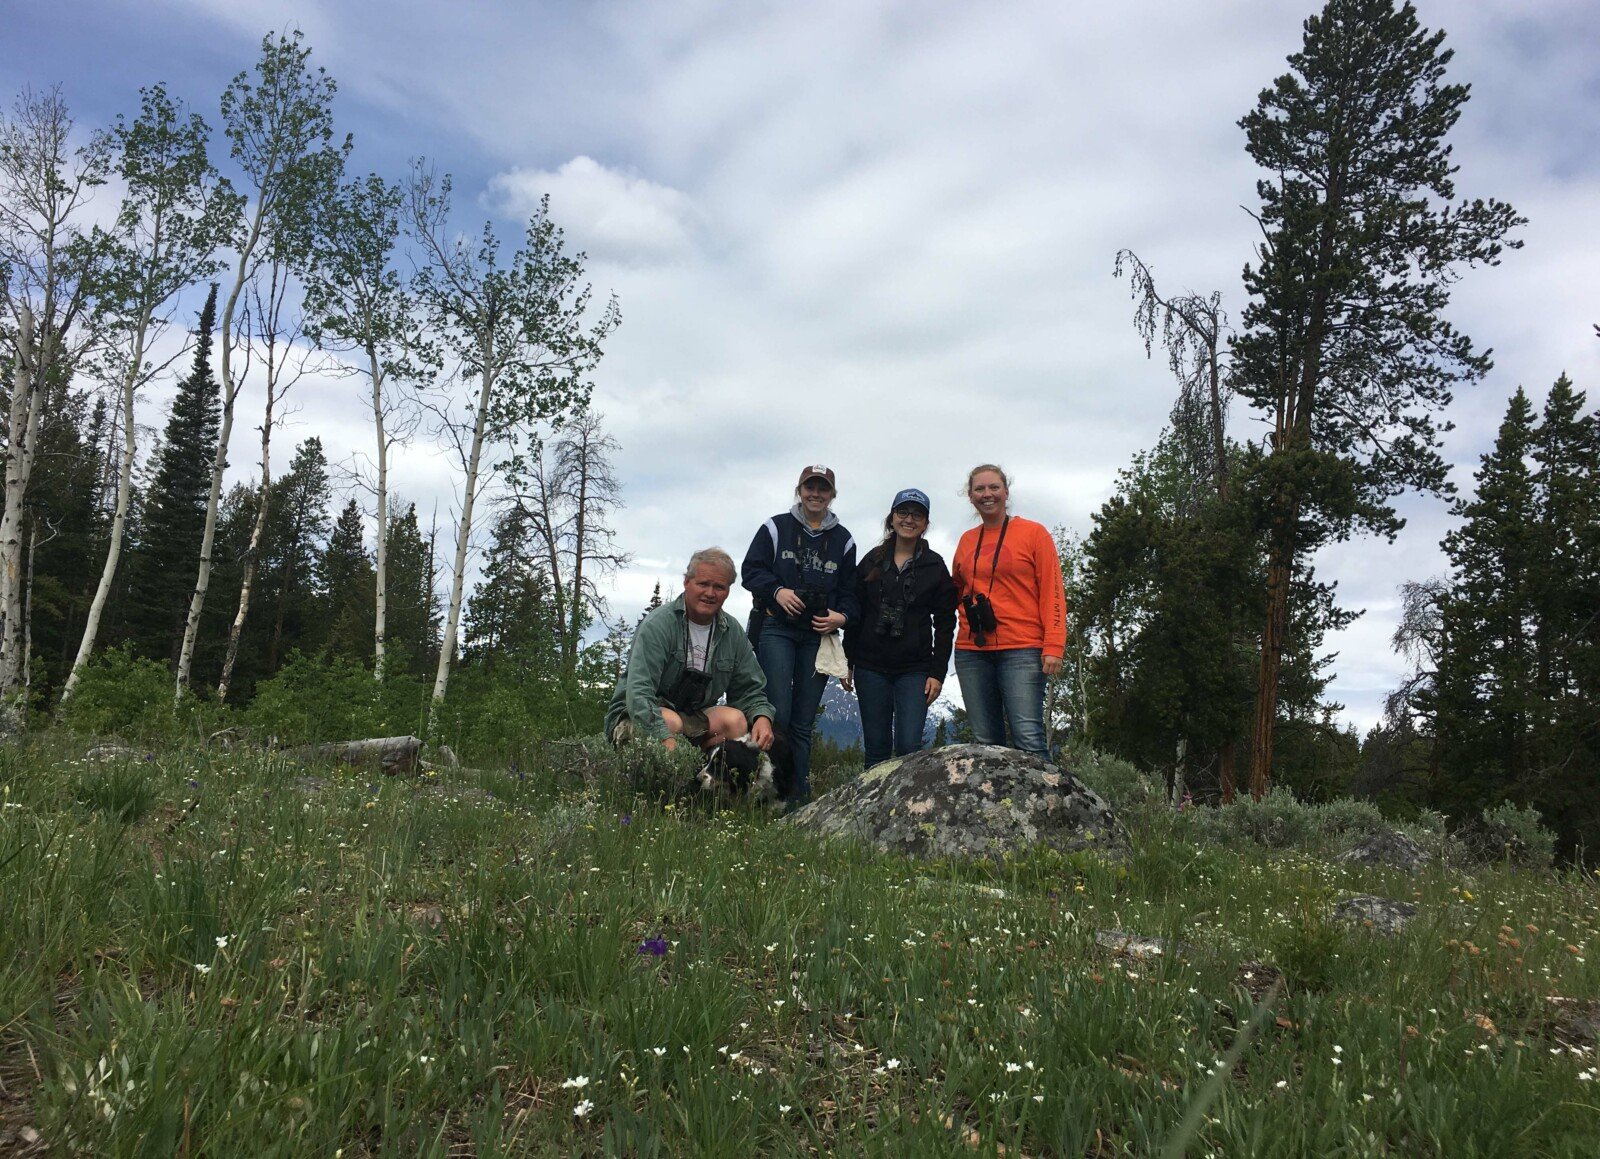 From left, Eric C. Atkinson, Chloe Winkler, Kayla Harakal (Berg), and Becky Watkins (plus Shep the American Farm Collie) at the Lily Lake avian disease study site in the Beartooth Mountains.